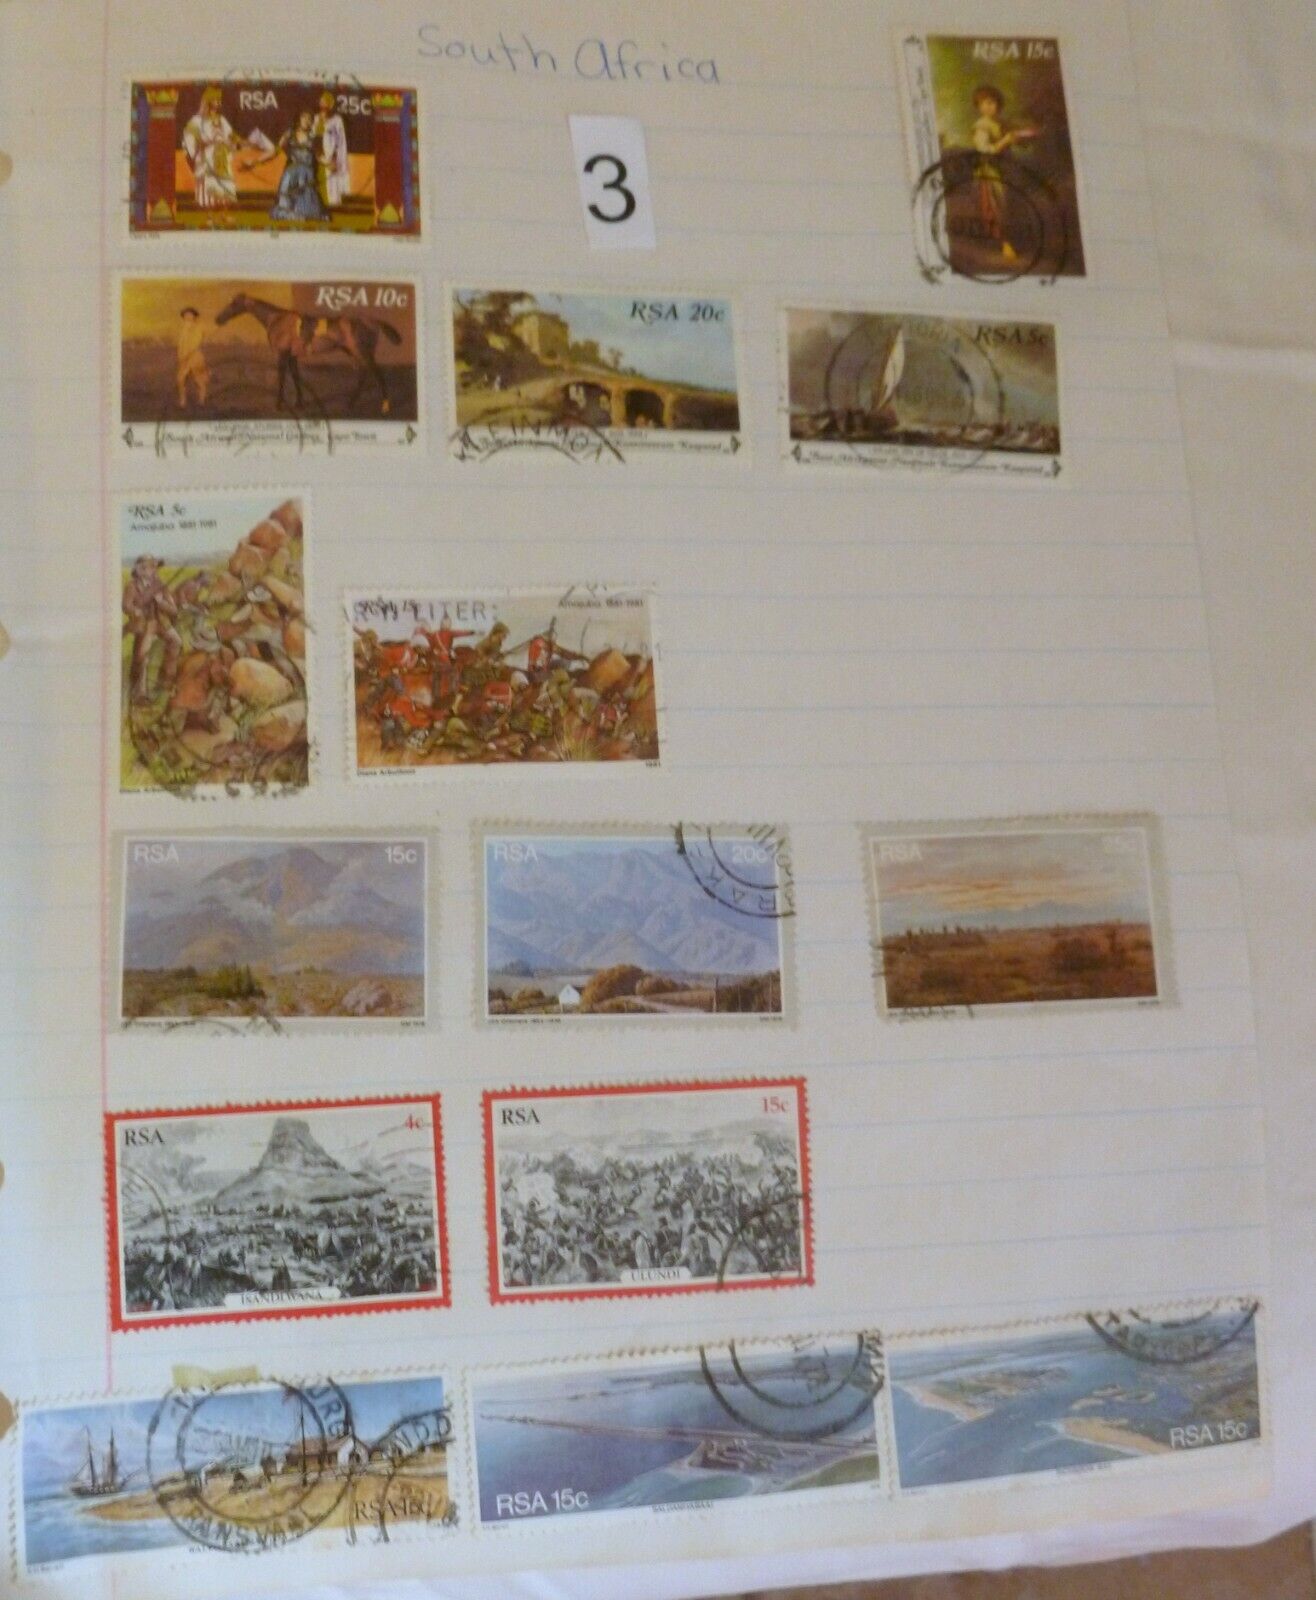 SOUTH AFRICA 15 POSTAGE STAMPS Historical Battles Mountains Sea Bays, Paintings  Без бренда